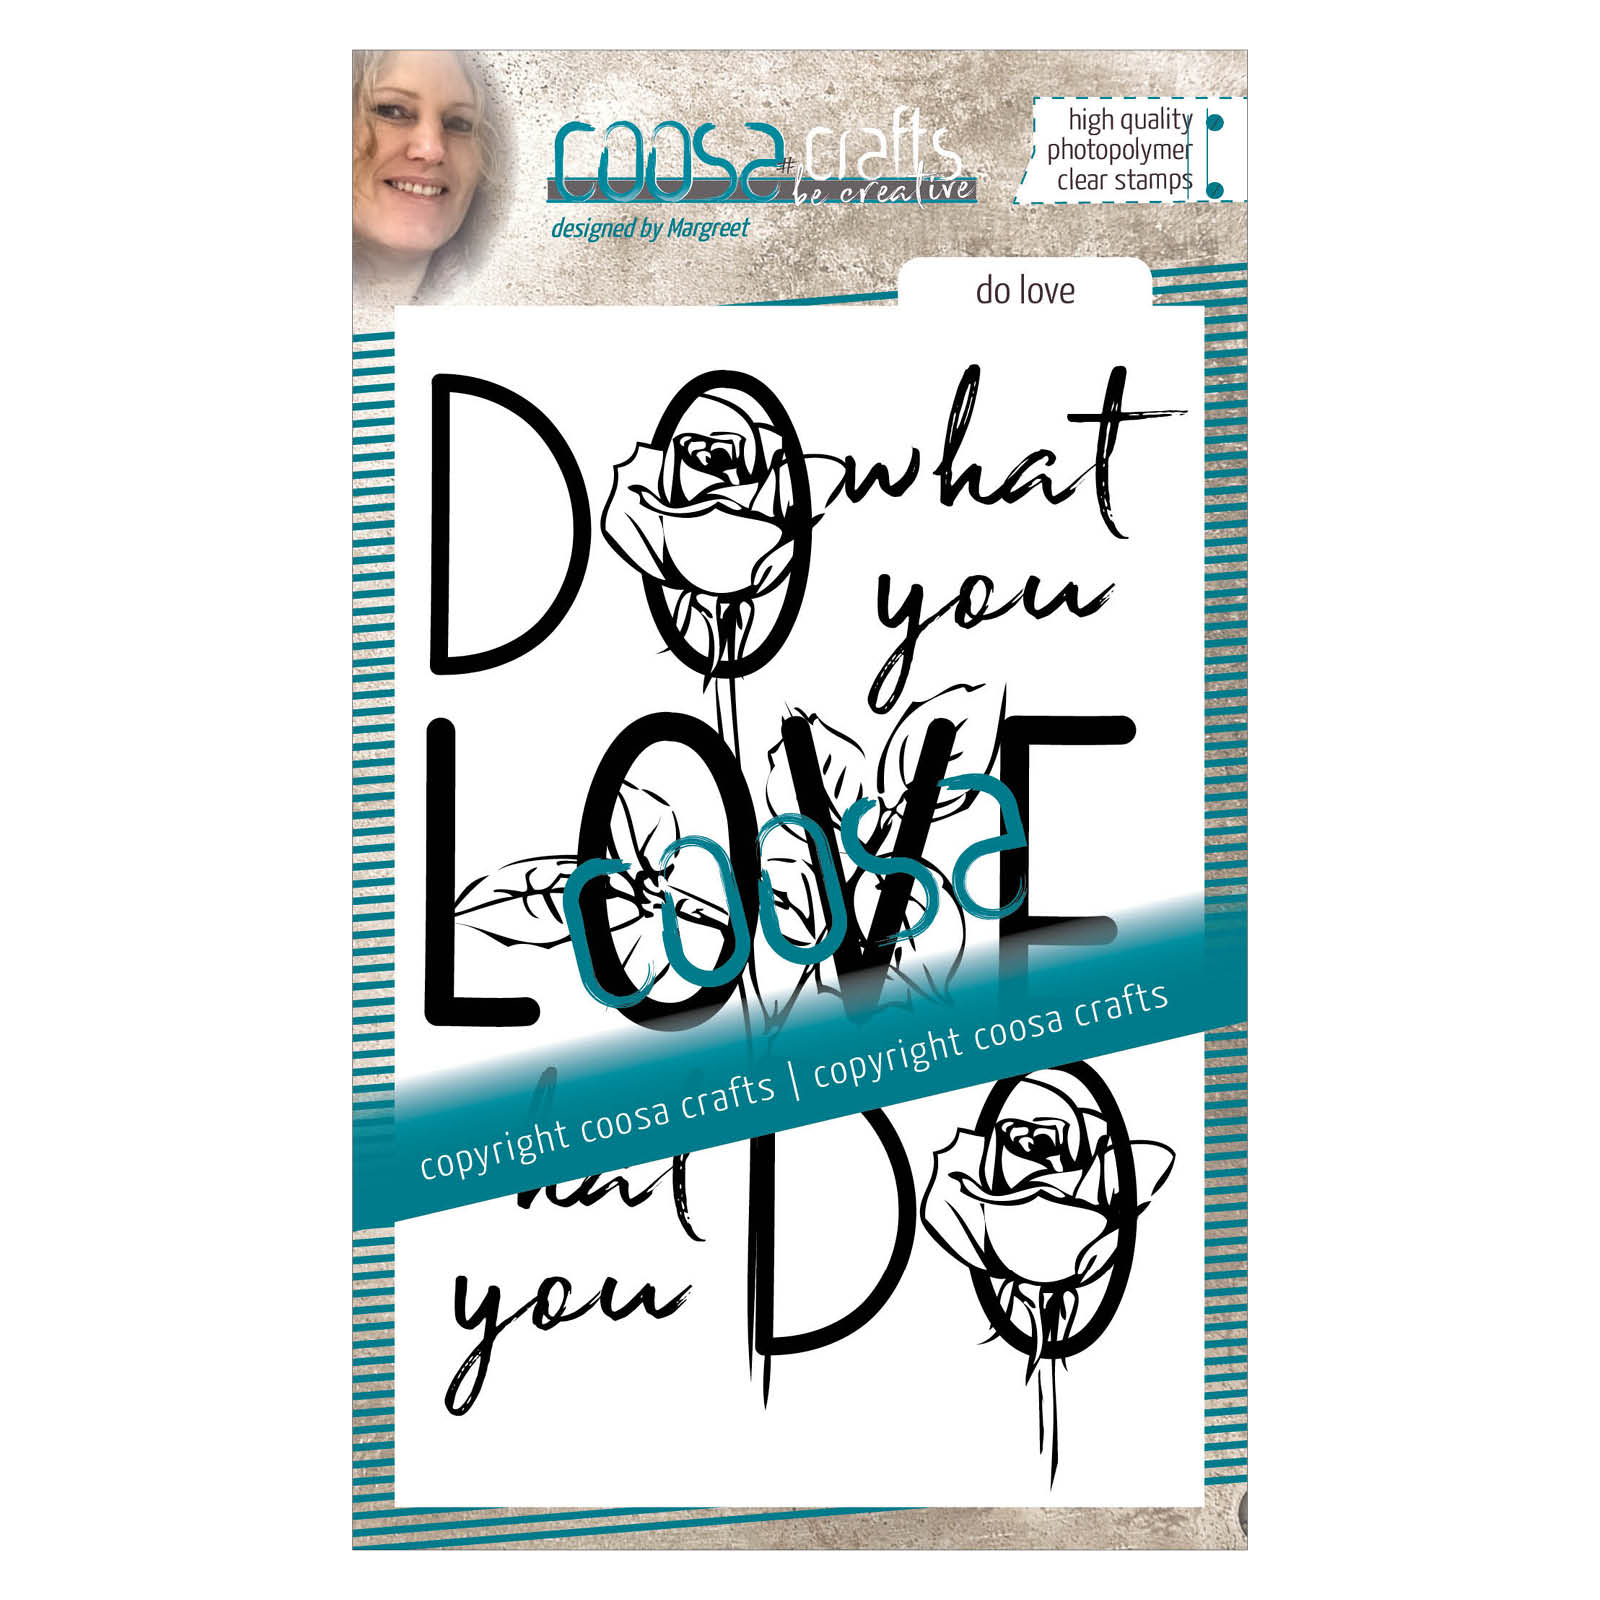 COOSA Crafts • Clear stempel Engels #2 Quote "Do love"